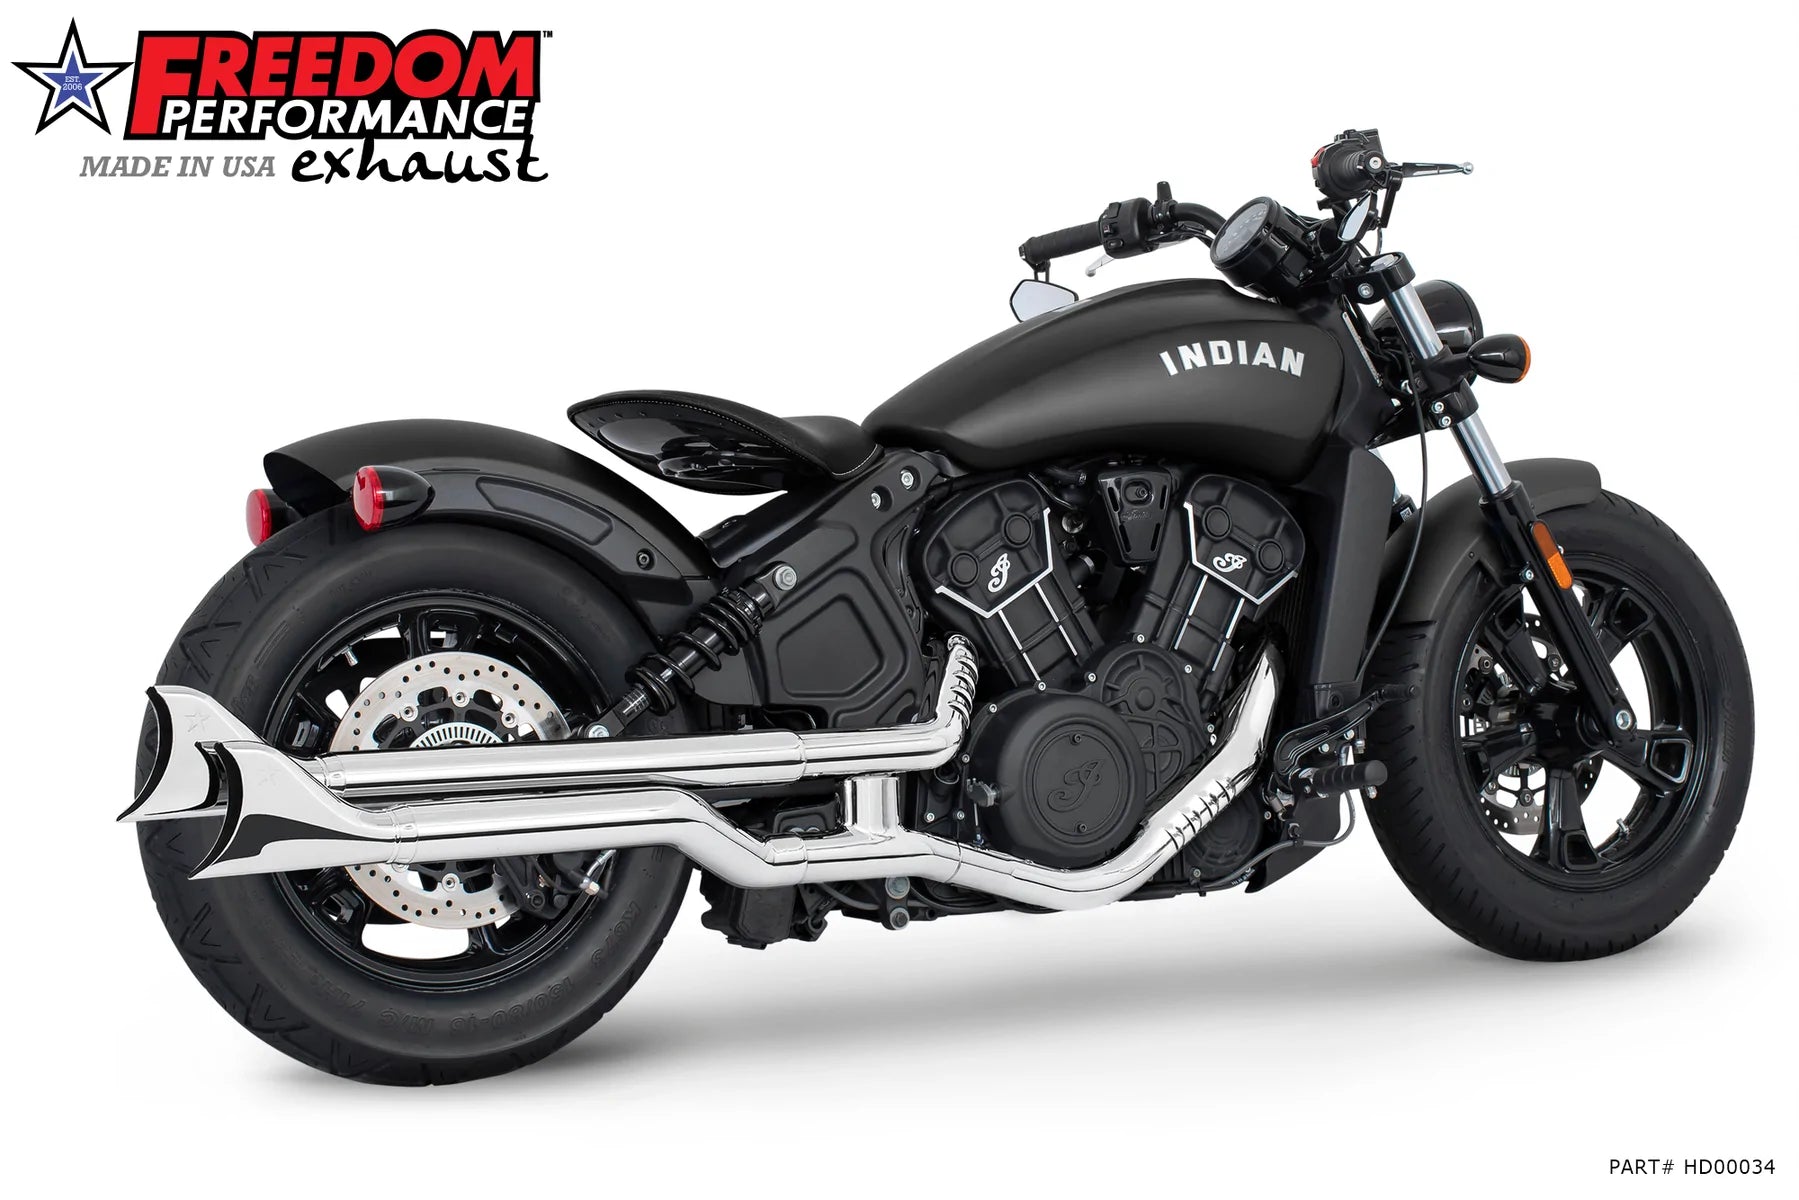 Freedom Performance Exhaust - 2.5" Slip-Ons for Indian Scout Rogue, Bobber, Sixty 2014-2022